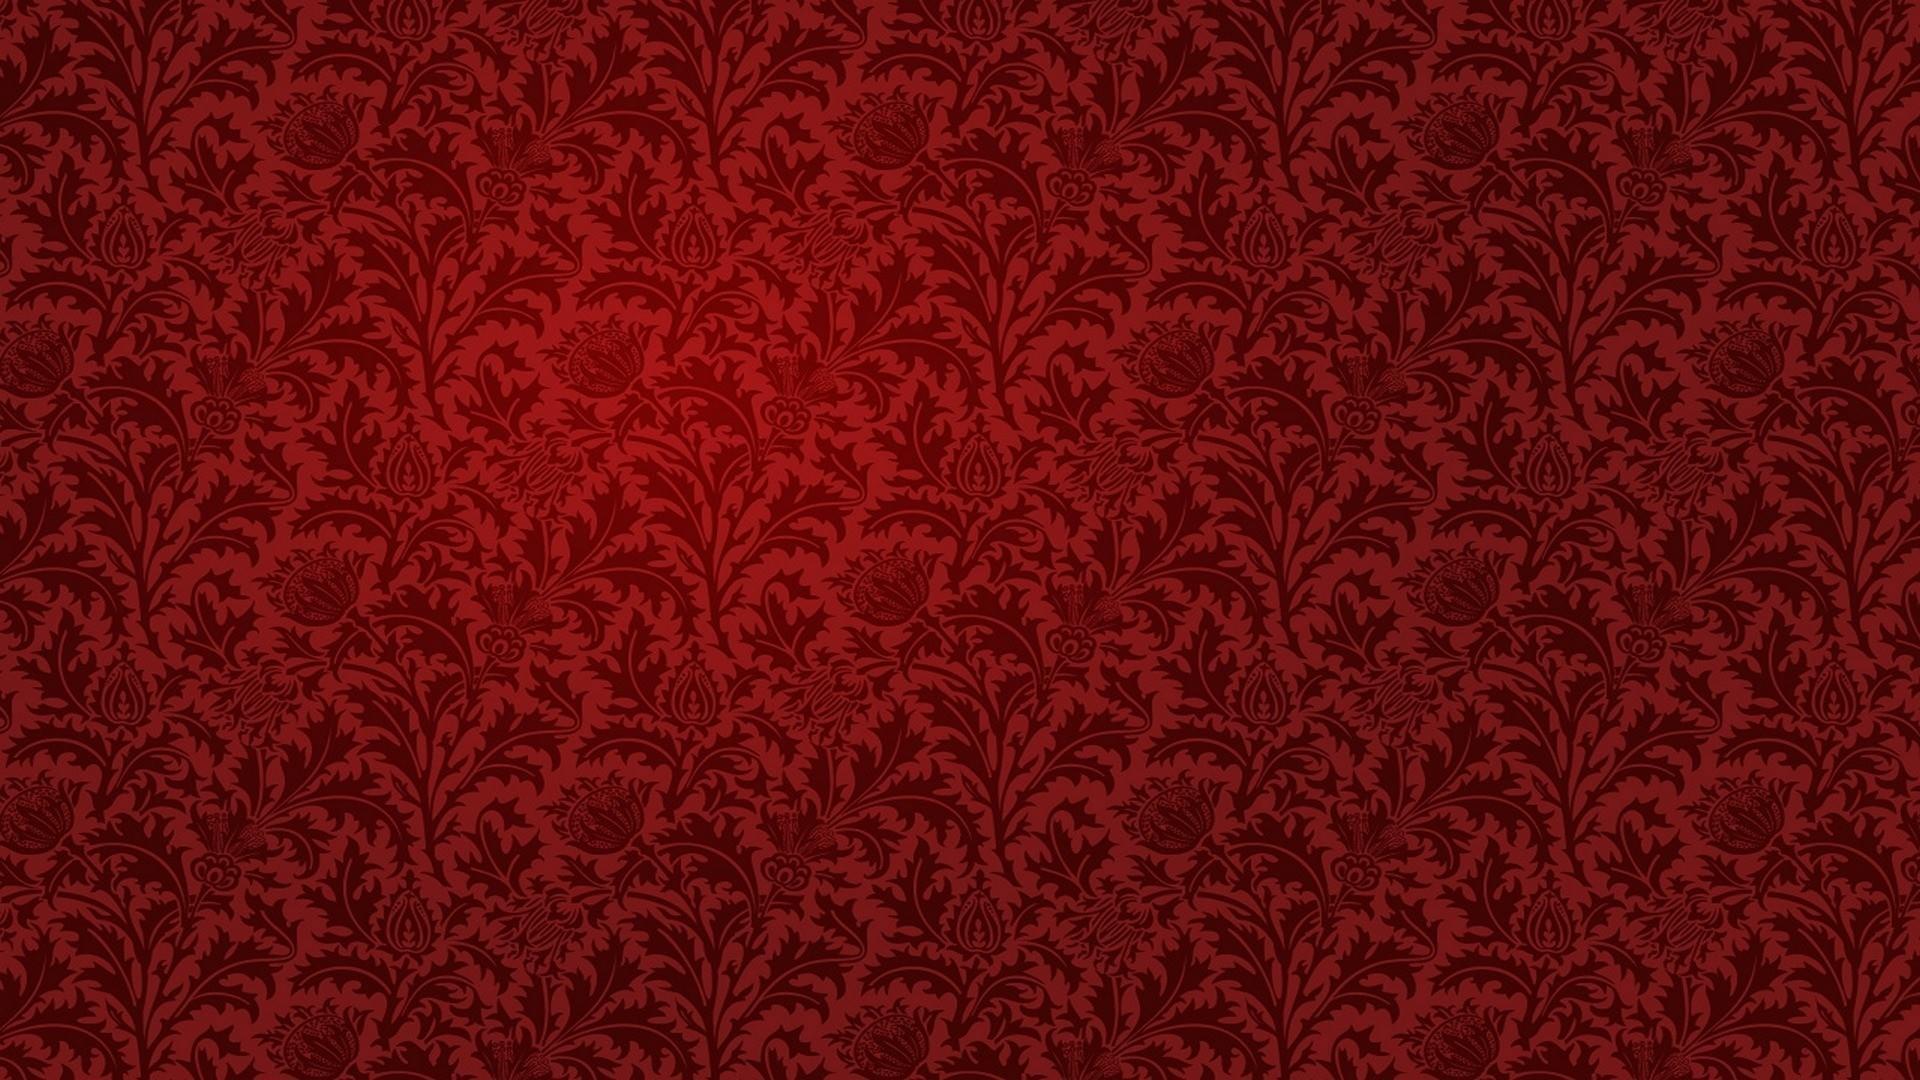 Red Floral Wallpaper. Floral Patterns. FreeCreatives. Epic